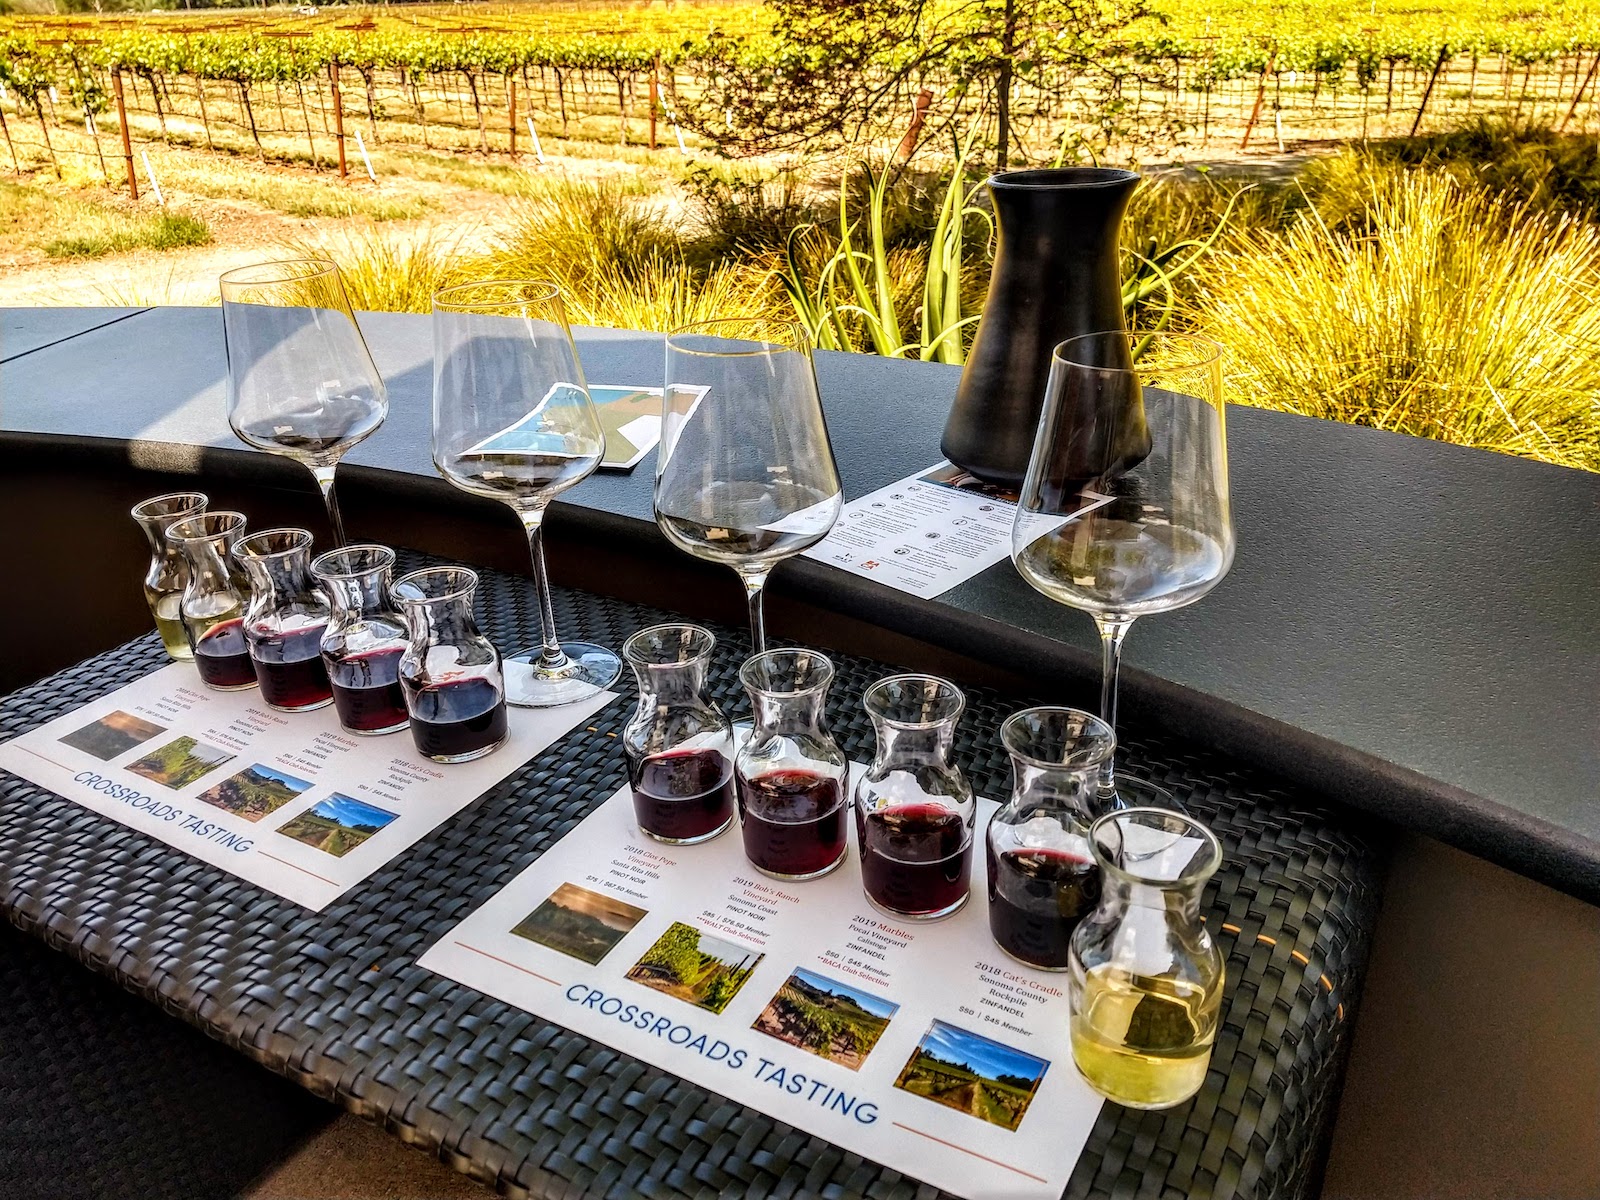 Wine glasses and samples of wine with identifying information await visitors for a wine tasting